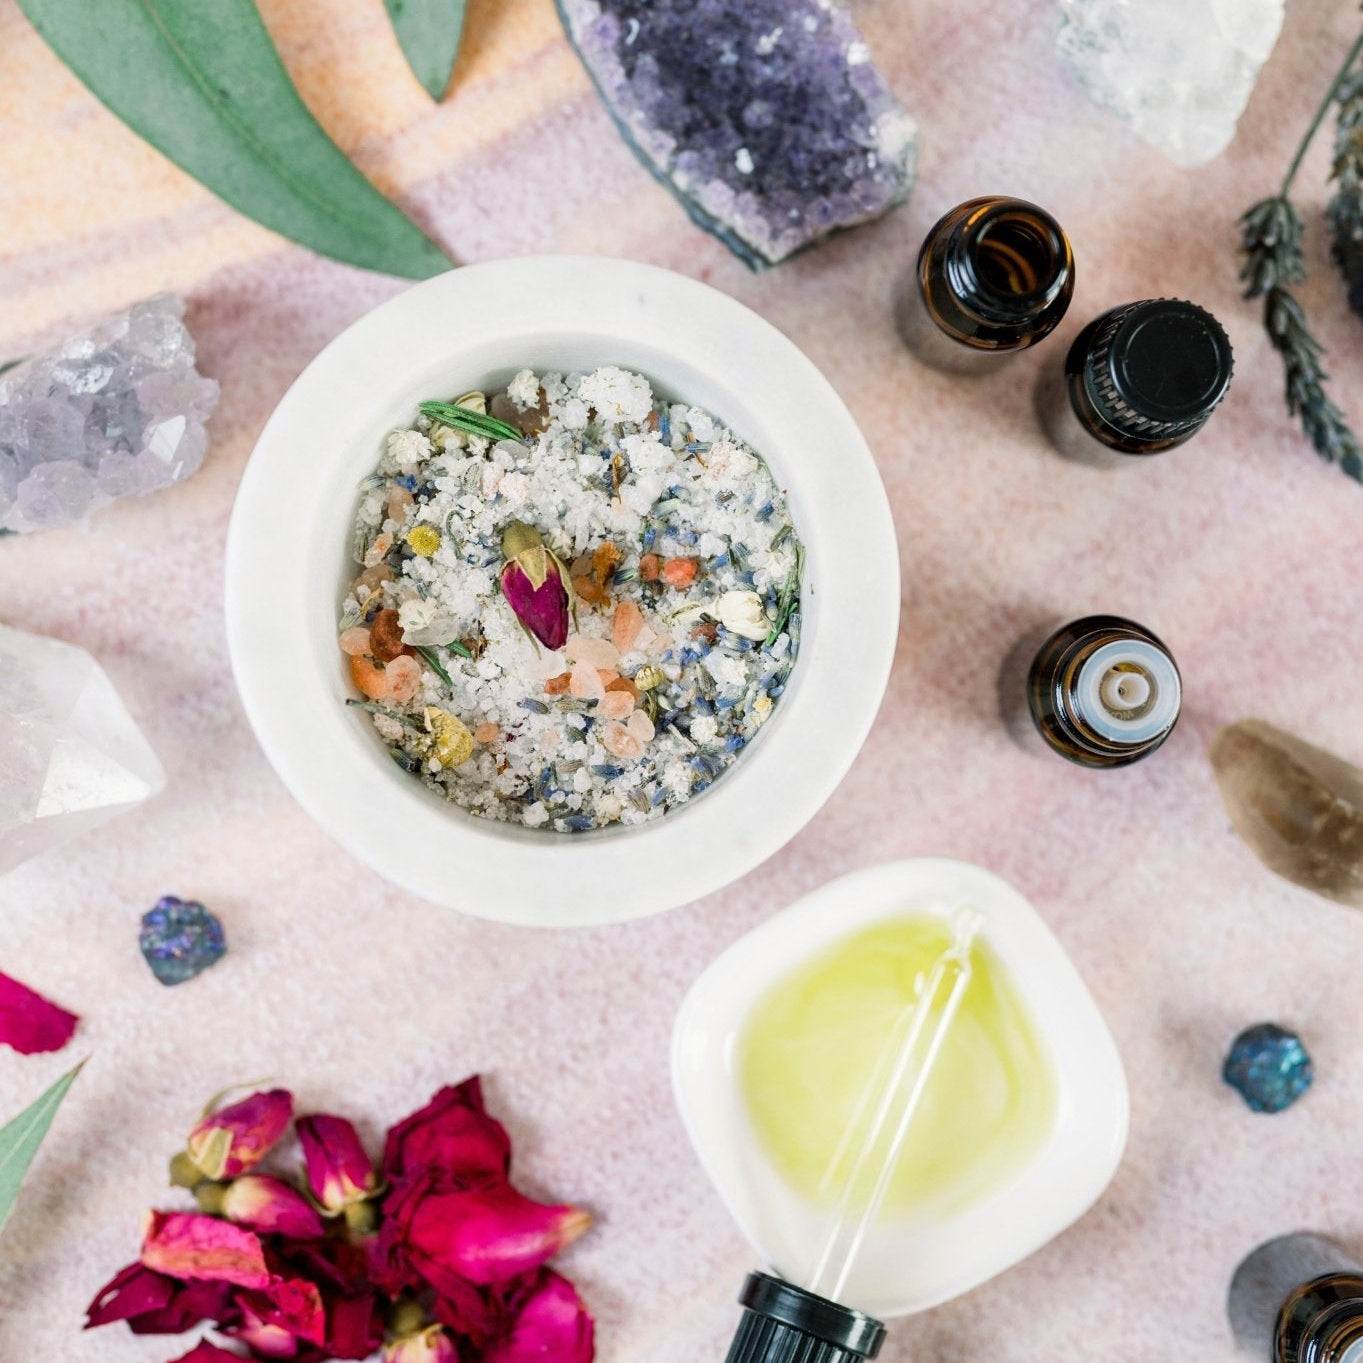 Almost Spring! Crystal Self-Care Spa Class with All Cheri's Intriguing Crystals March 19 - All Cheri's Intriguing Crystals LLCClass